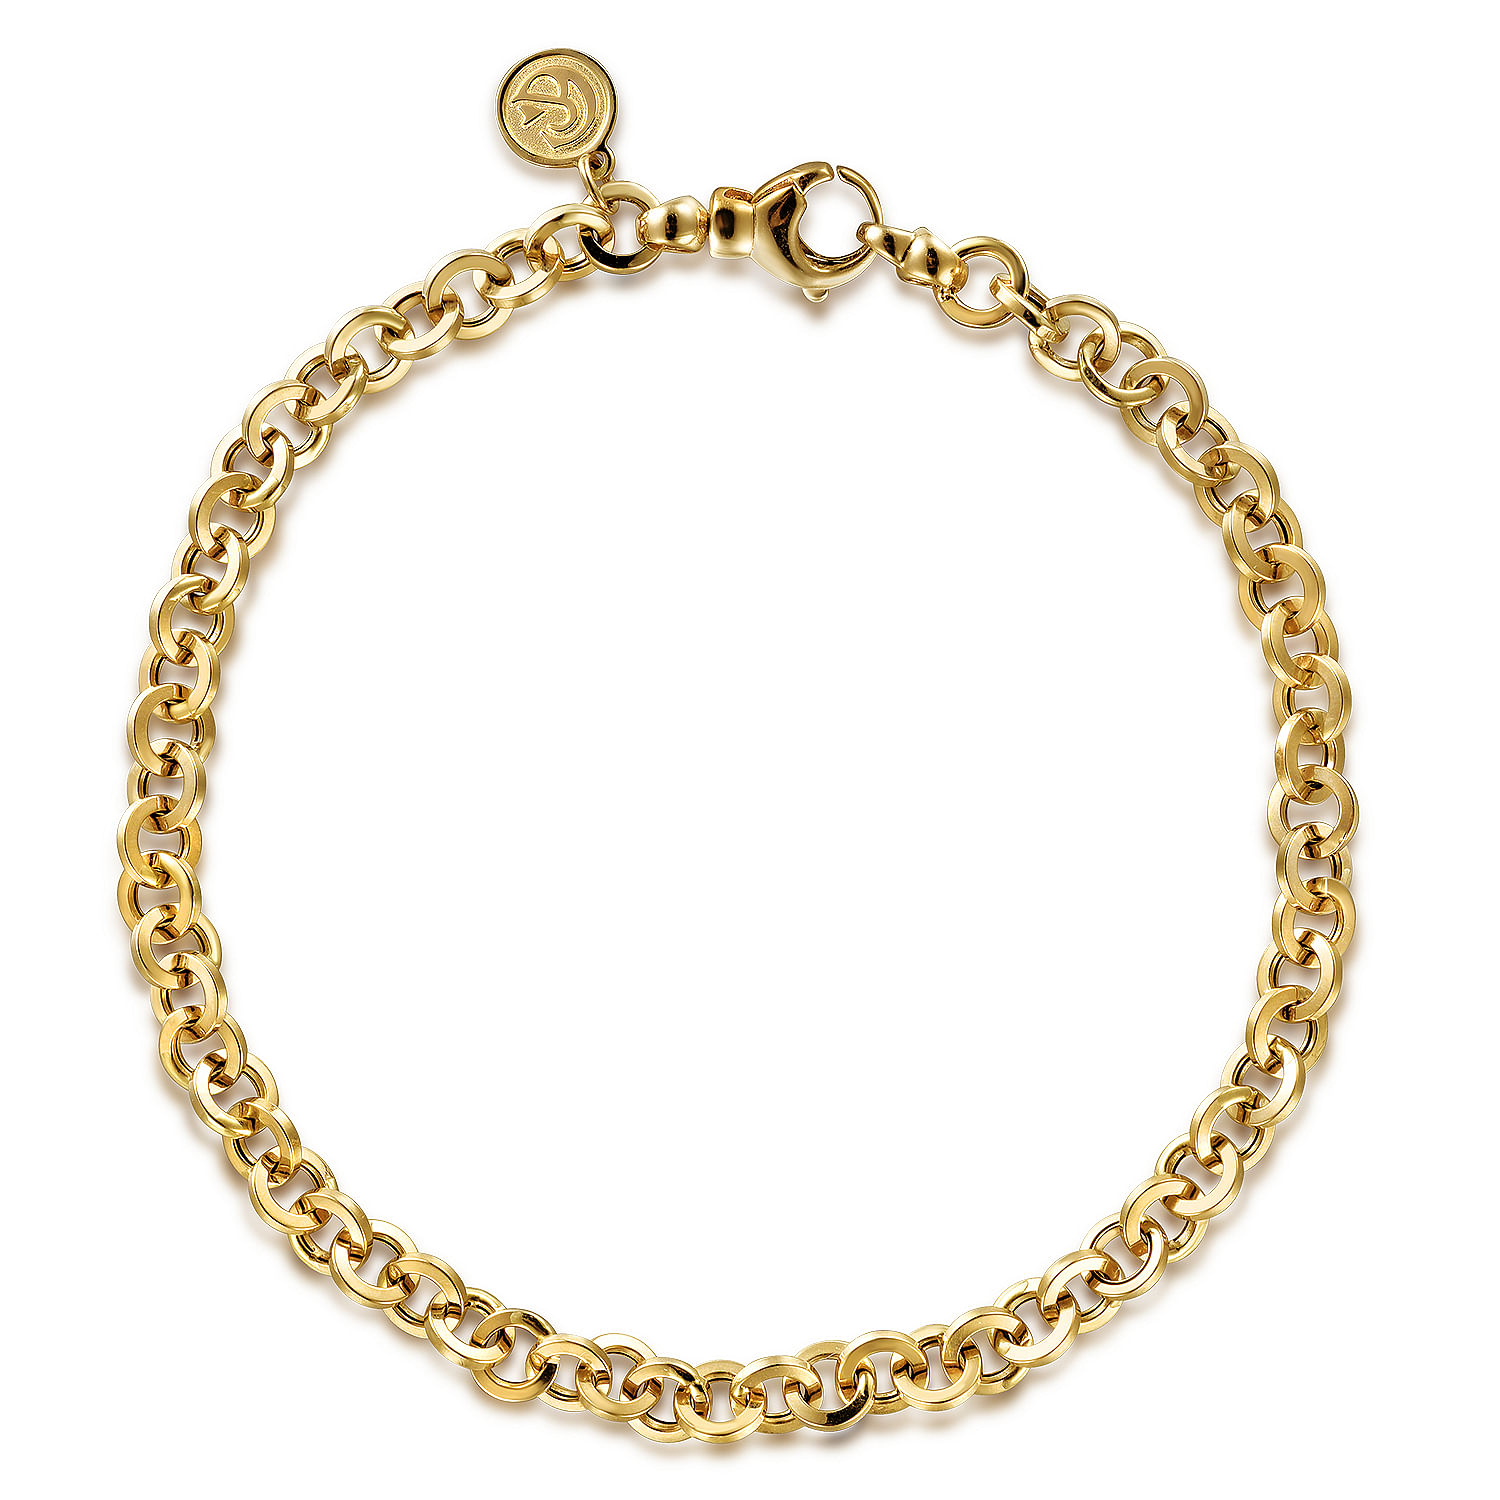 8 Inch 14K Yellow Gold Hollow Link Chain Bracelet